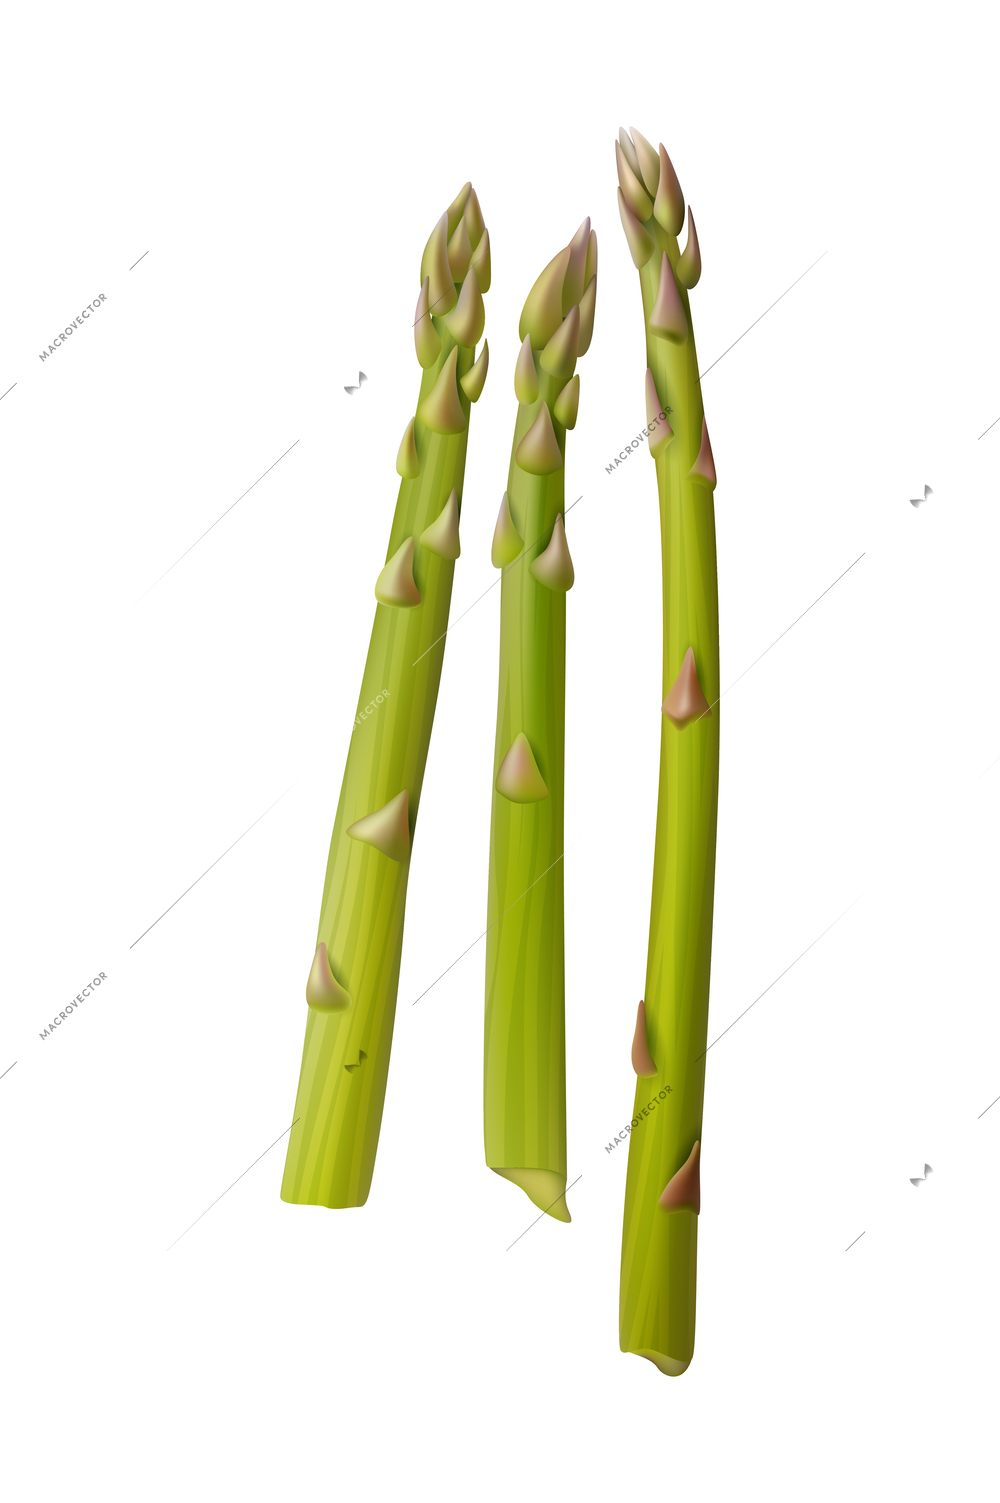 Realistic fresh asparagus spears on white background isolated vector illustration